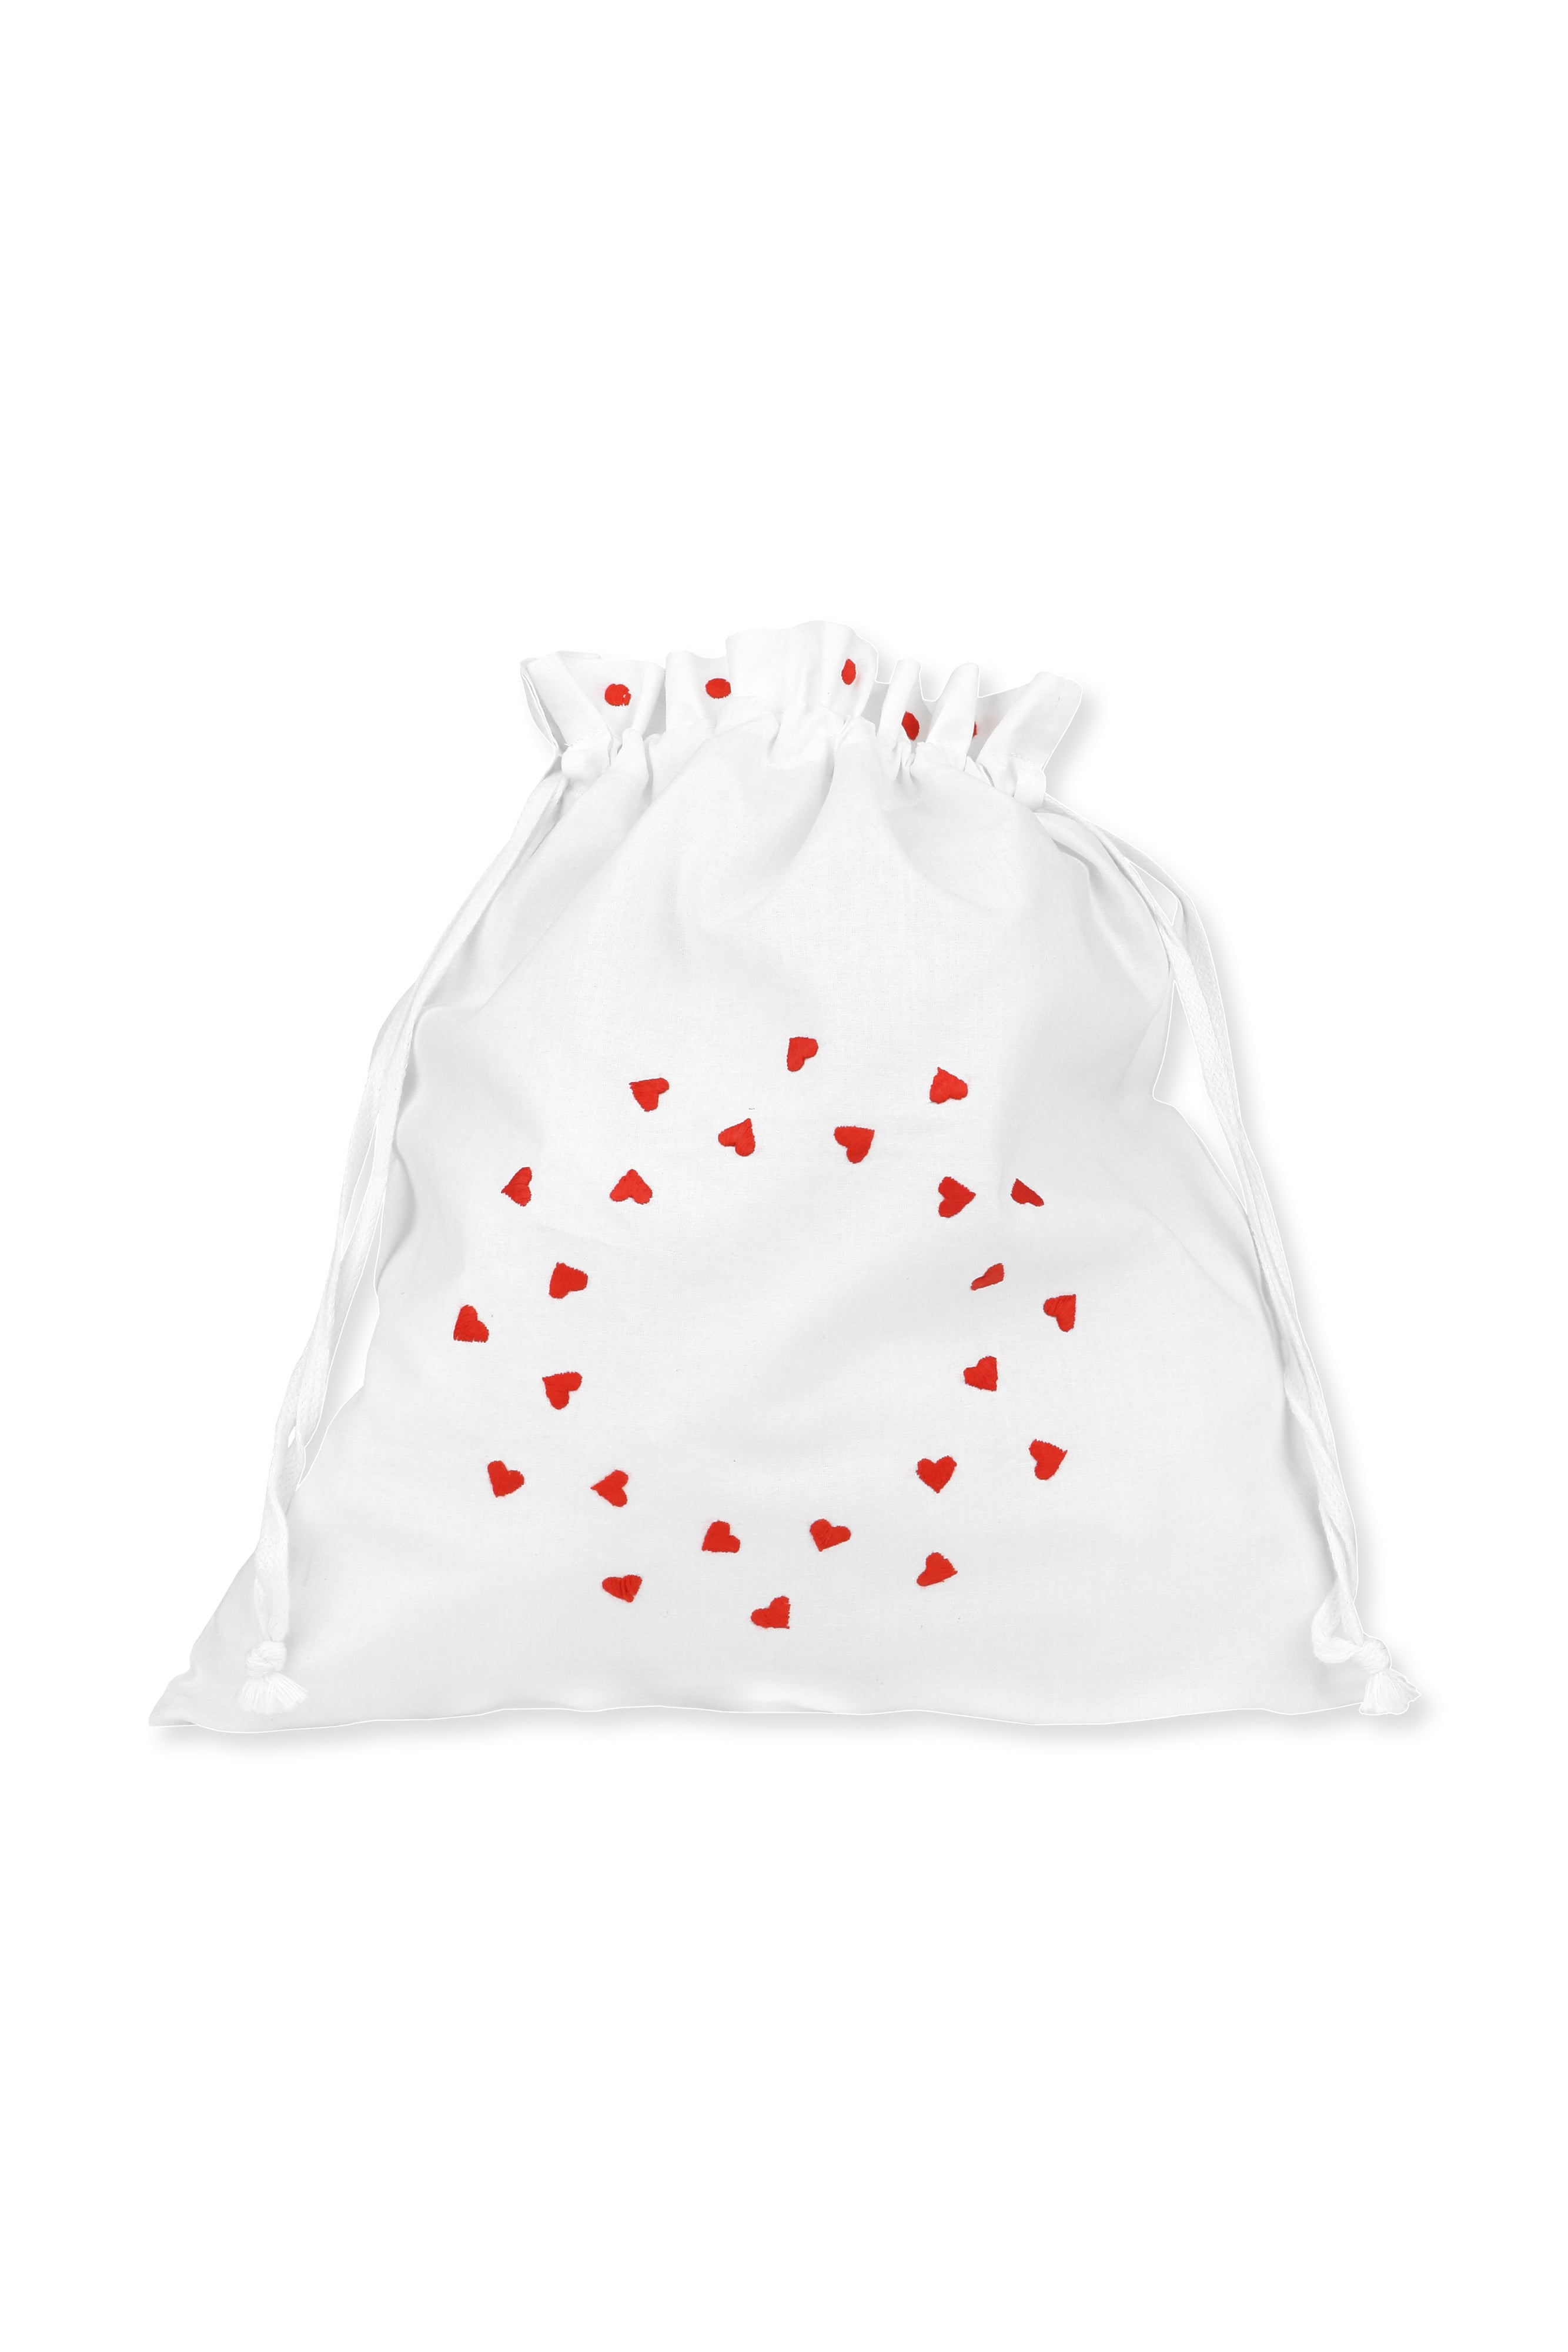 Embroidered Laundry bag Valentine